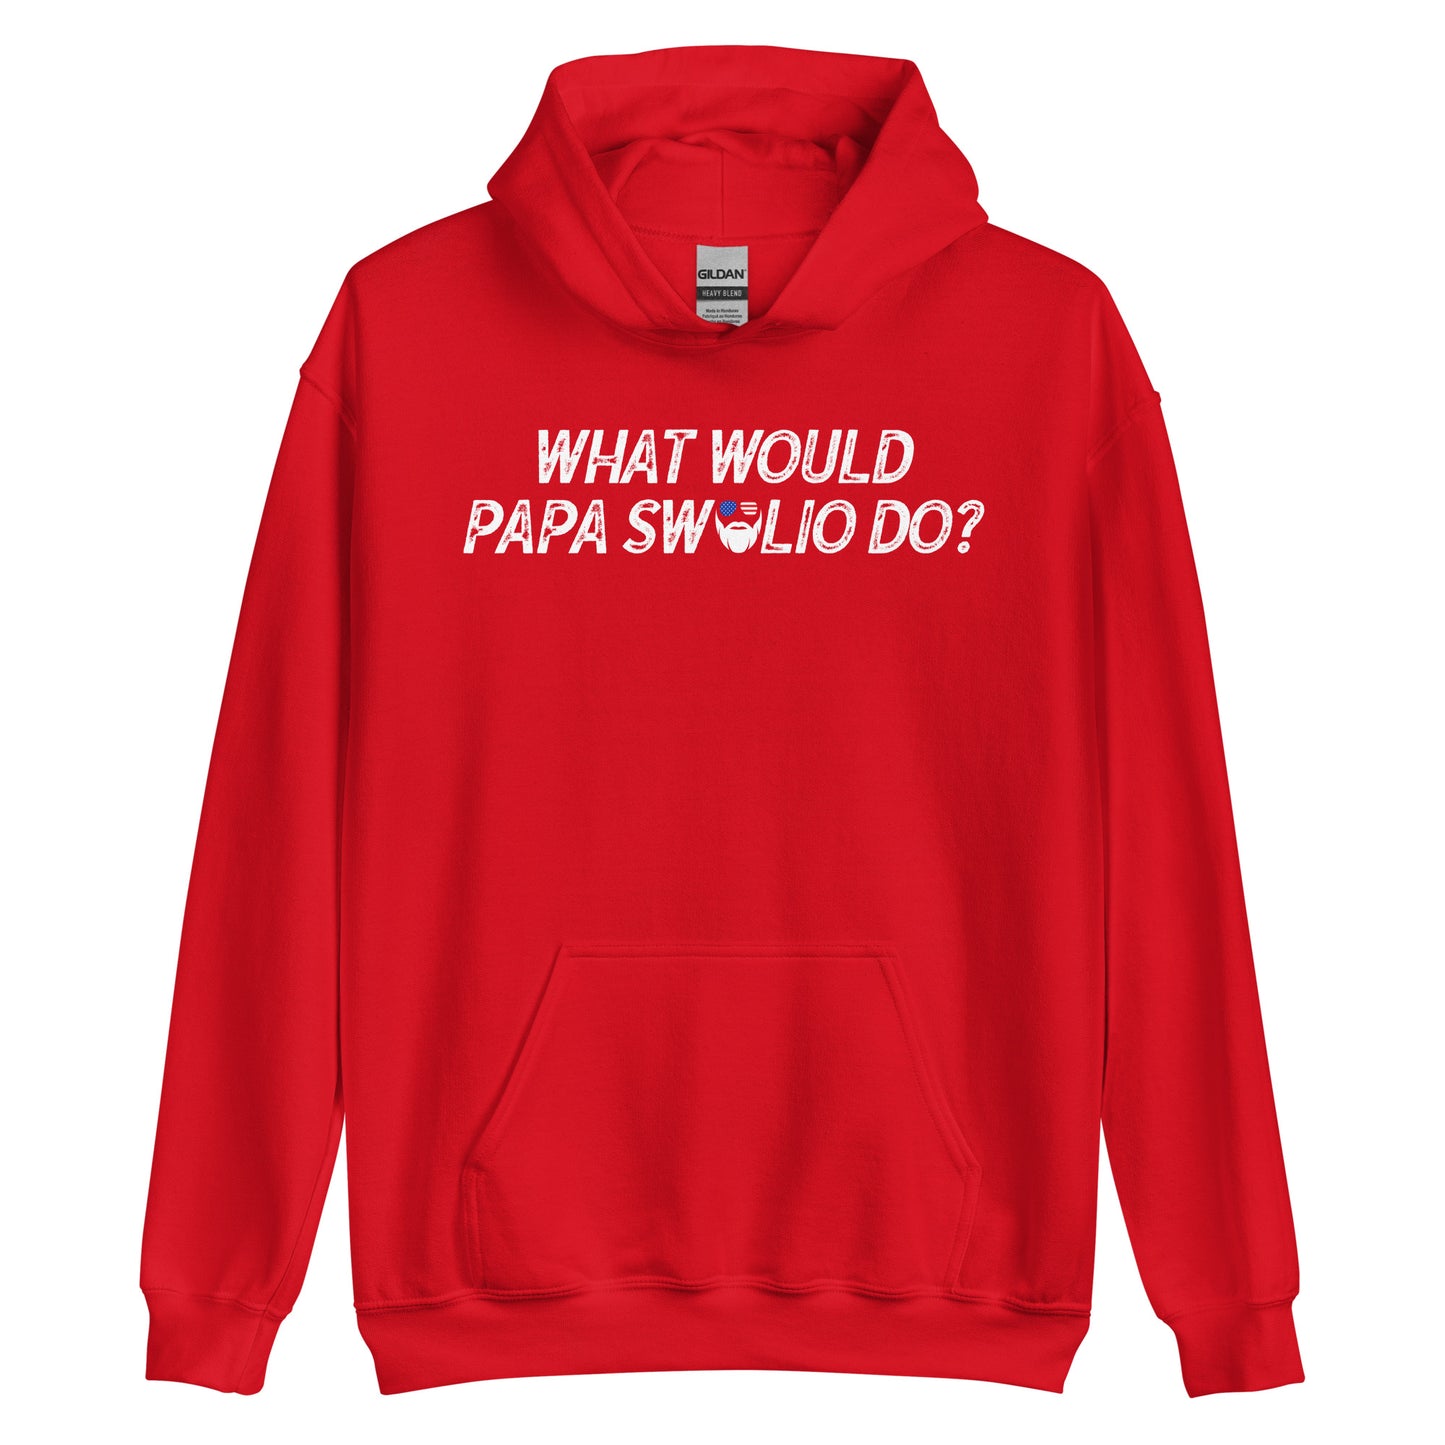 What Would Papa Swolio Do? Hoodie